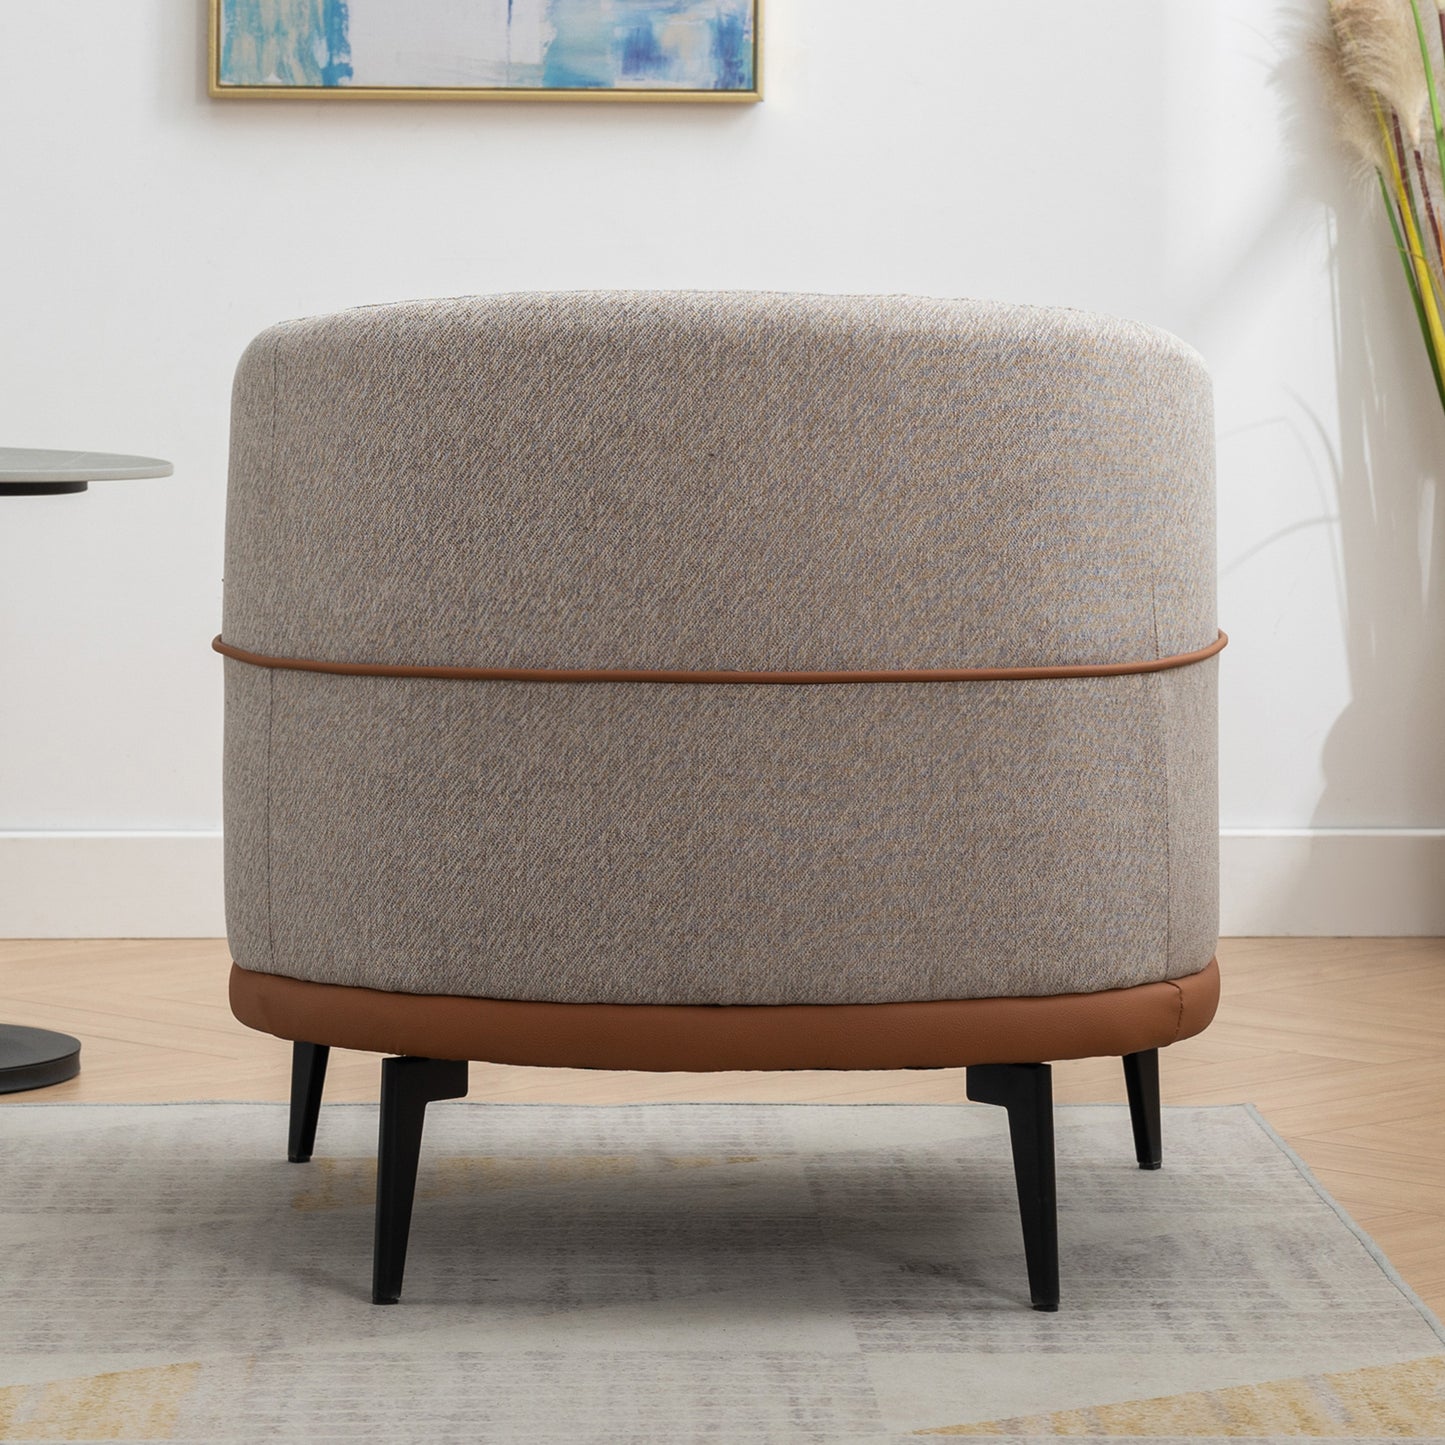 1st Choice Modern Two-tone Upholstered Round Armchair in Burnt Orange